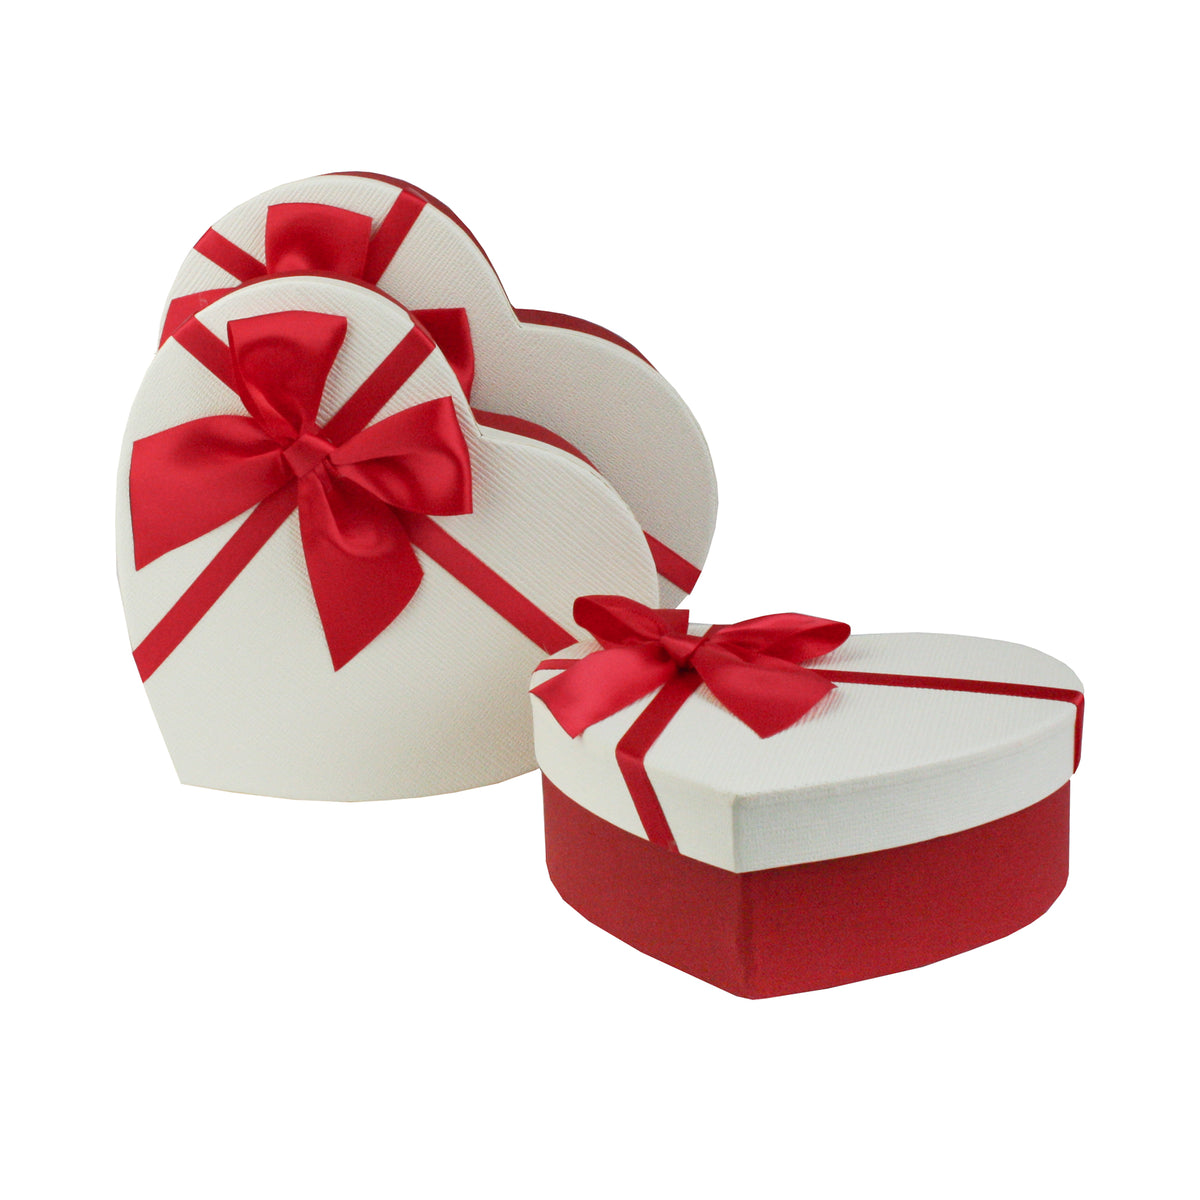 Luxury Heart Shaped Red/White Gift Boxes - Set of 3 (Sizes Available)